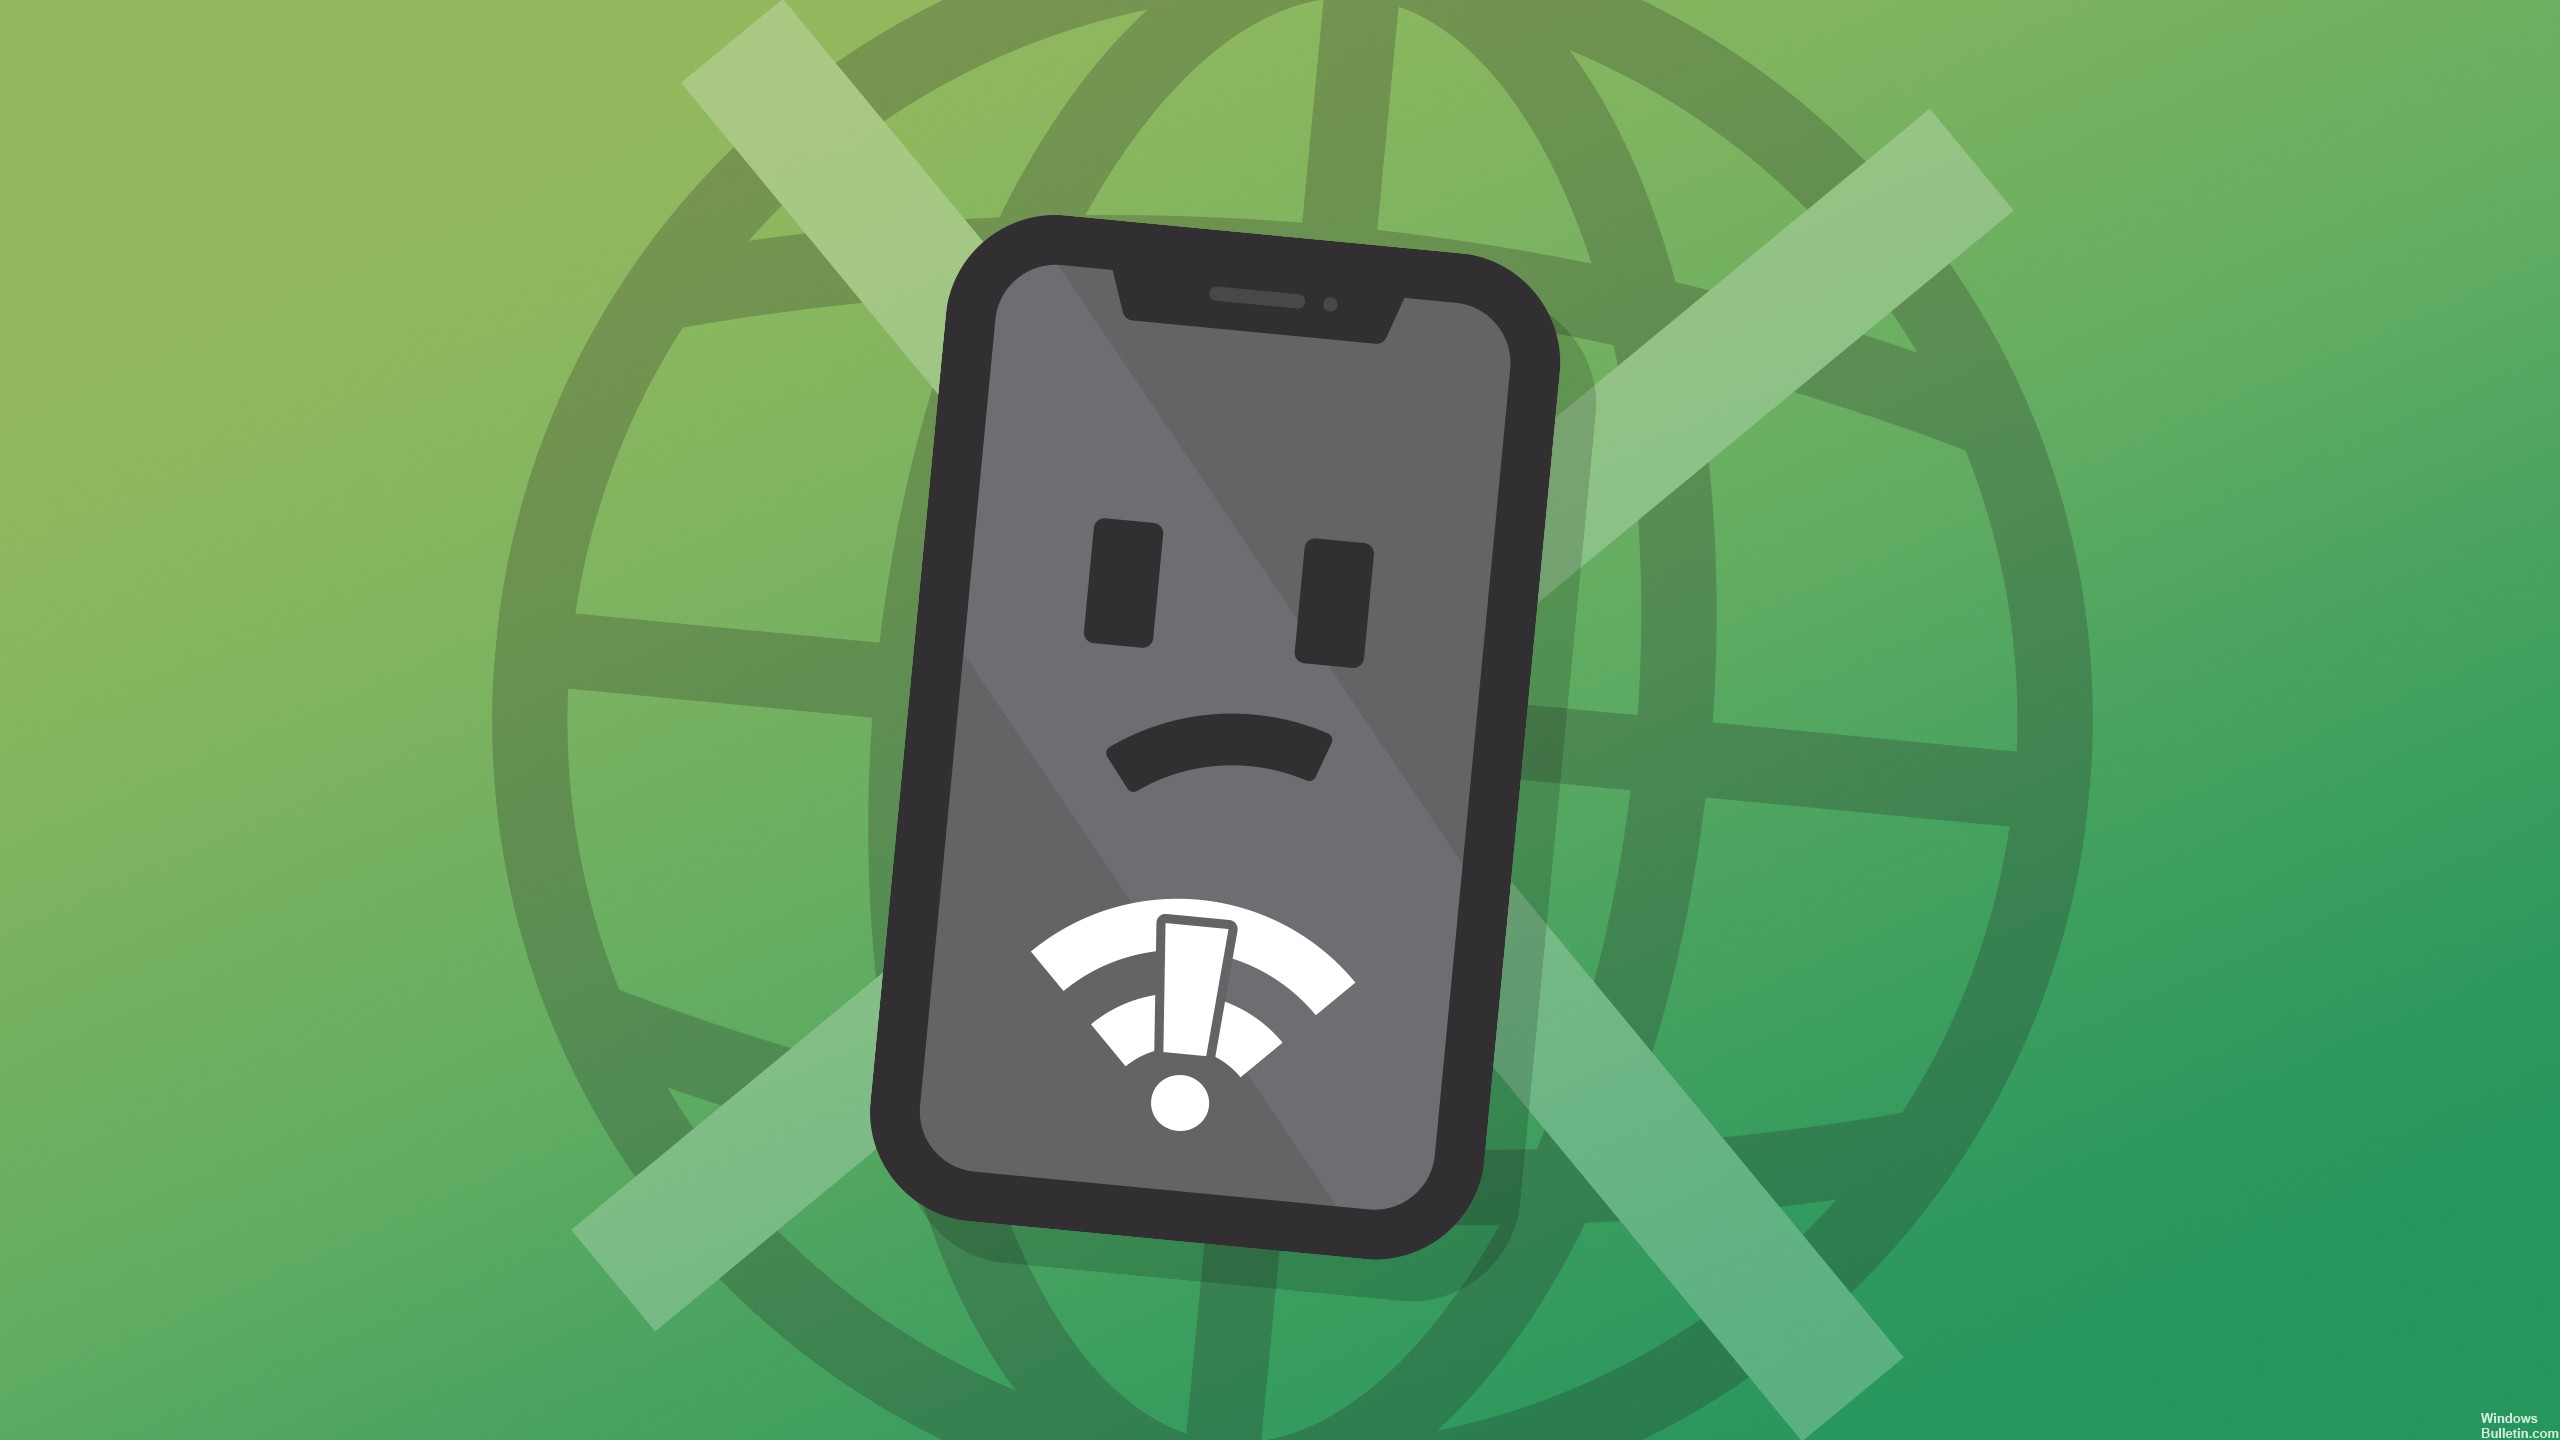 What causes the "Internet may not be available" error on Android devices